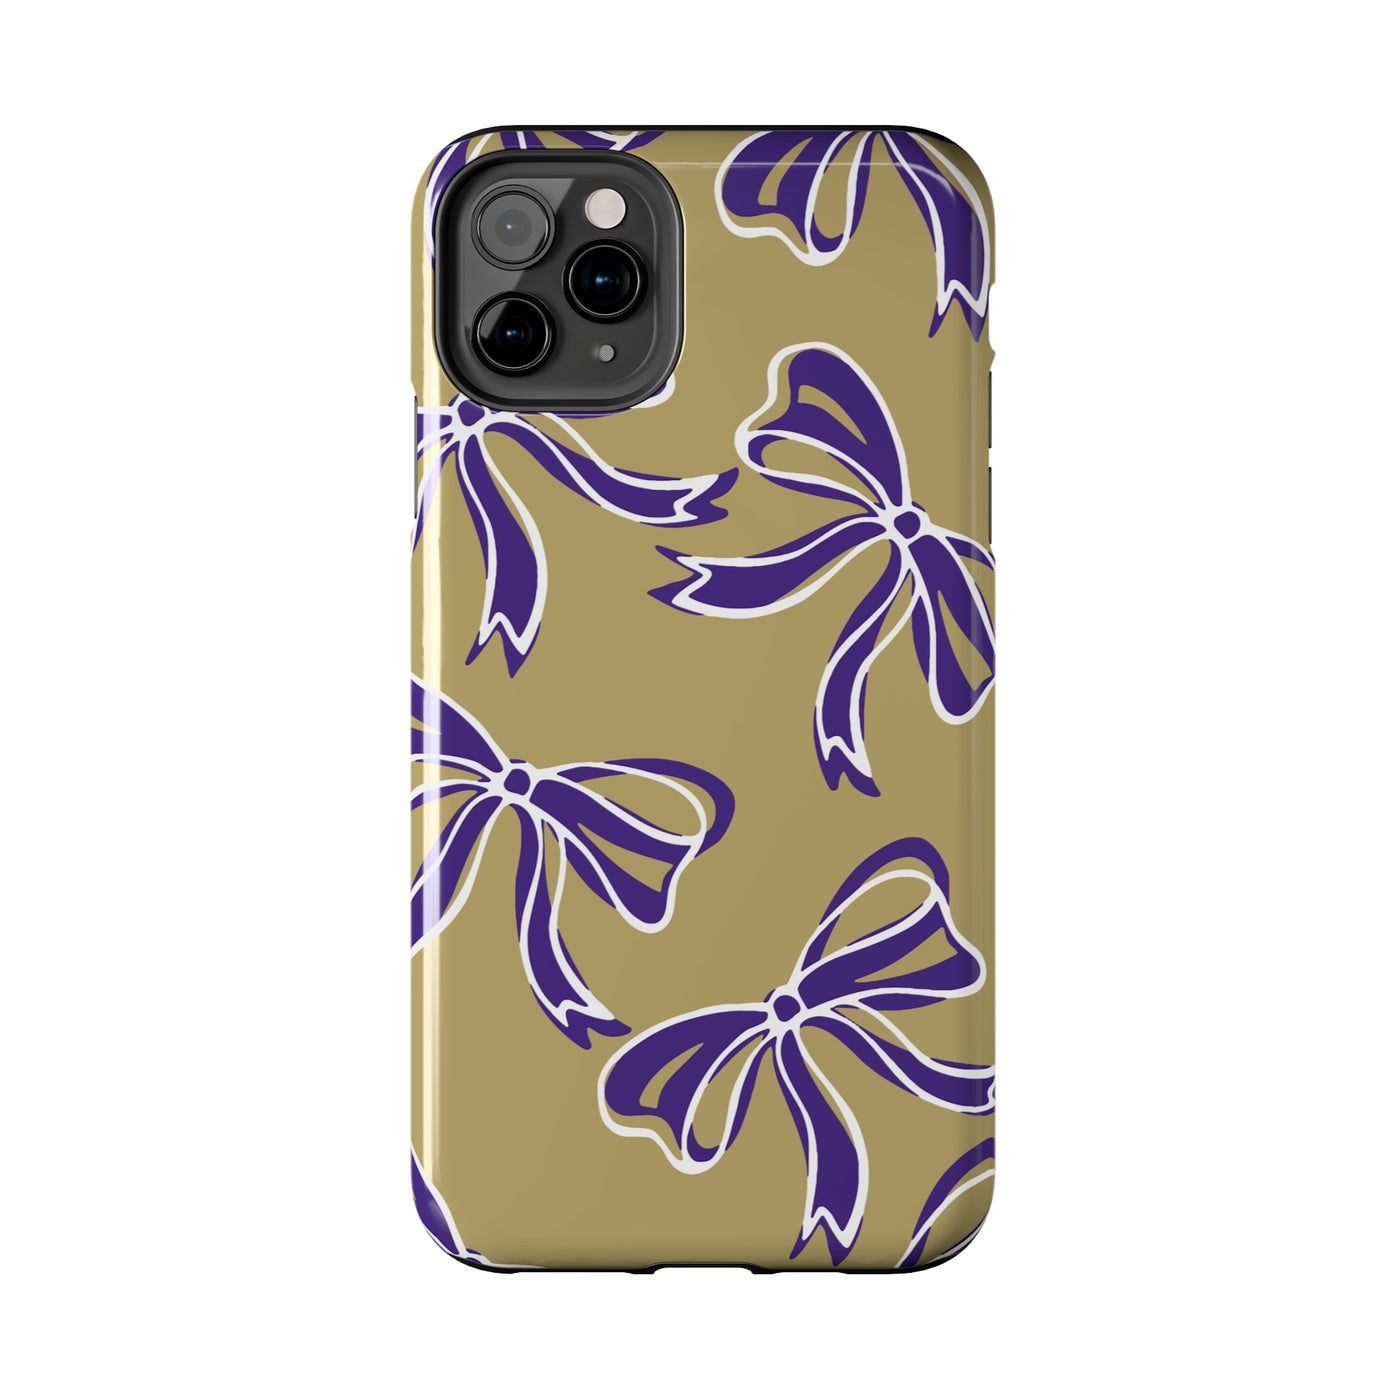 Trendy Bow Phone Case, Bed Party Bow Iphone case, Bow Phone Case, College Case, Bow Gifts - James Madison - JMU Dukes - Purple and Gold